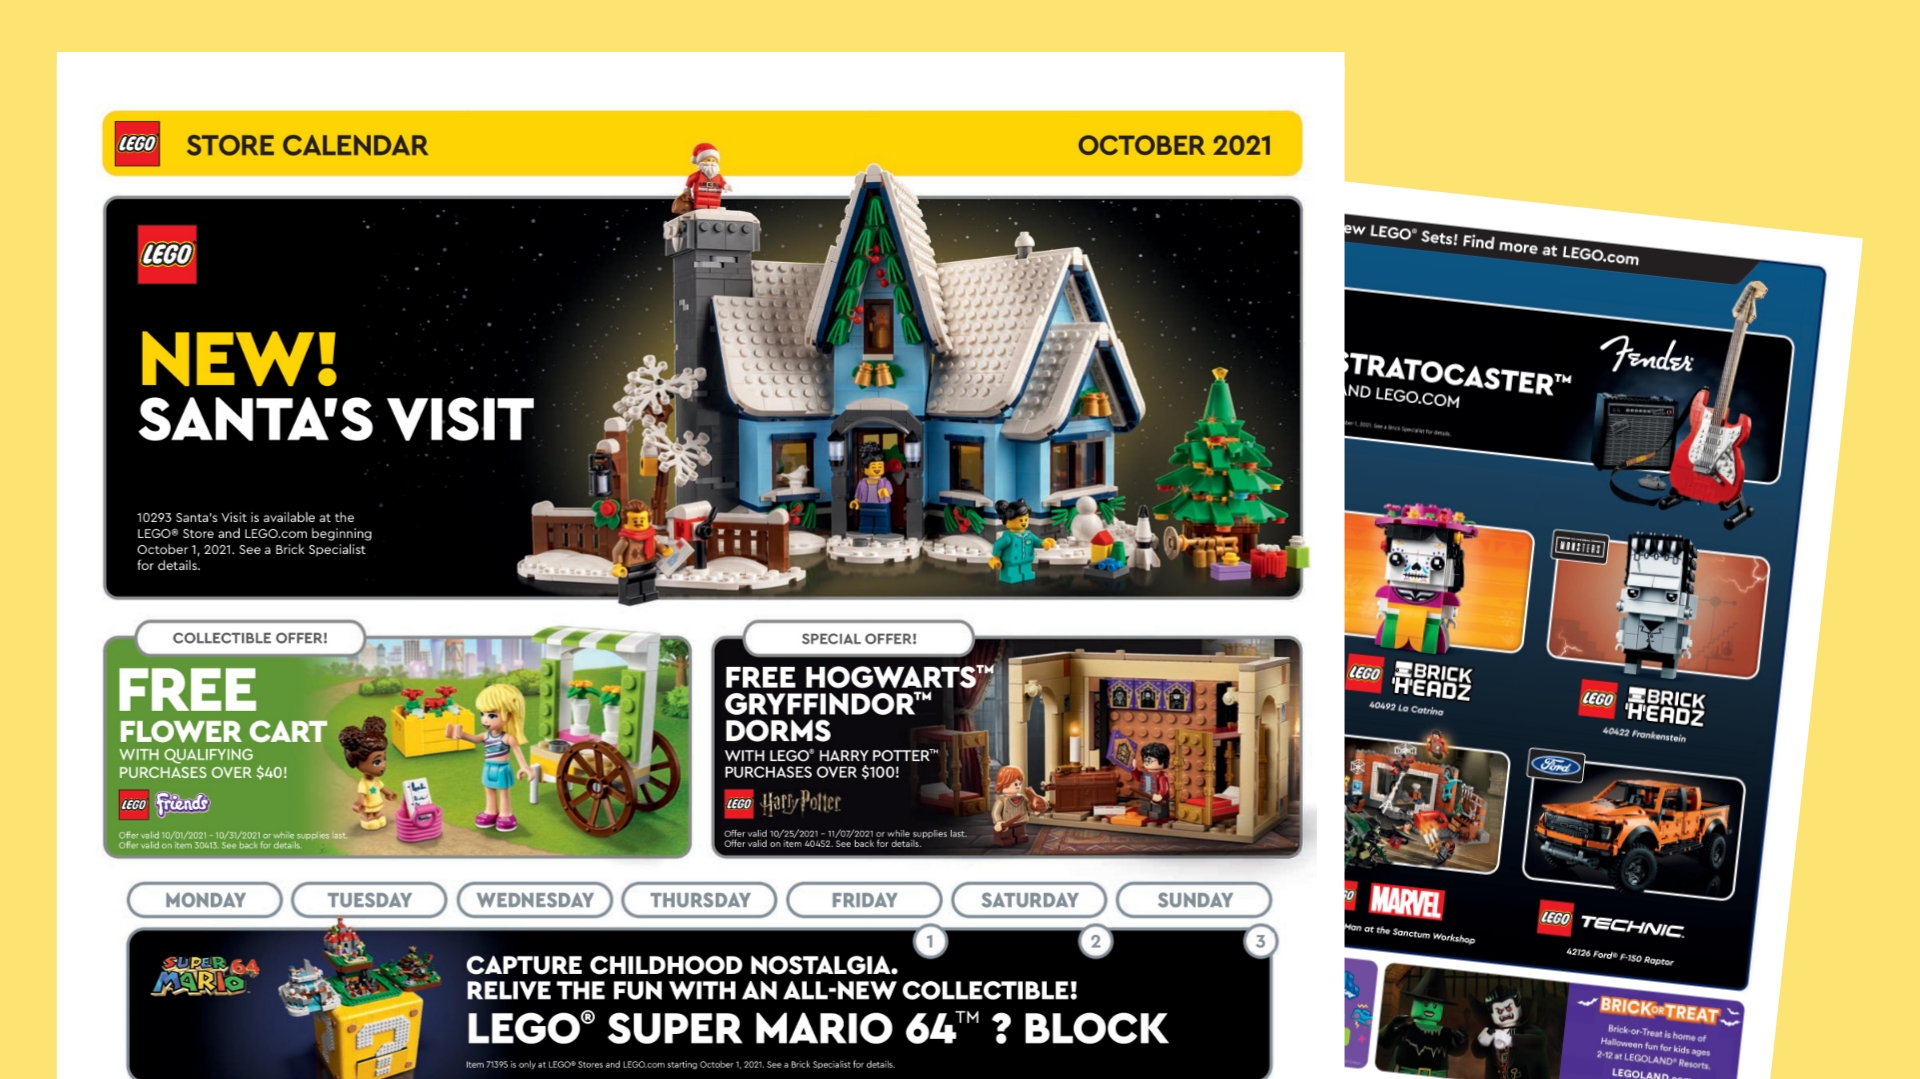 Lego October 2022 Calendar Us Lego Store Calendar For October 2021 Is Here! | The Brick Post!